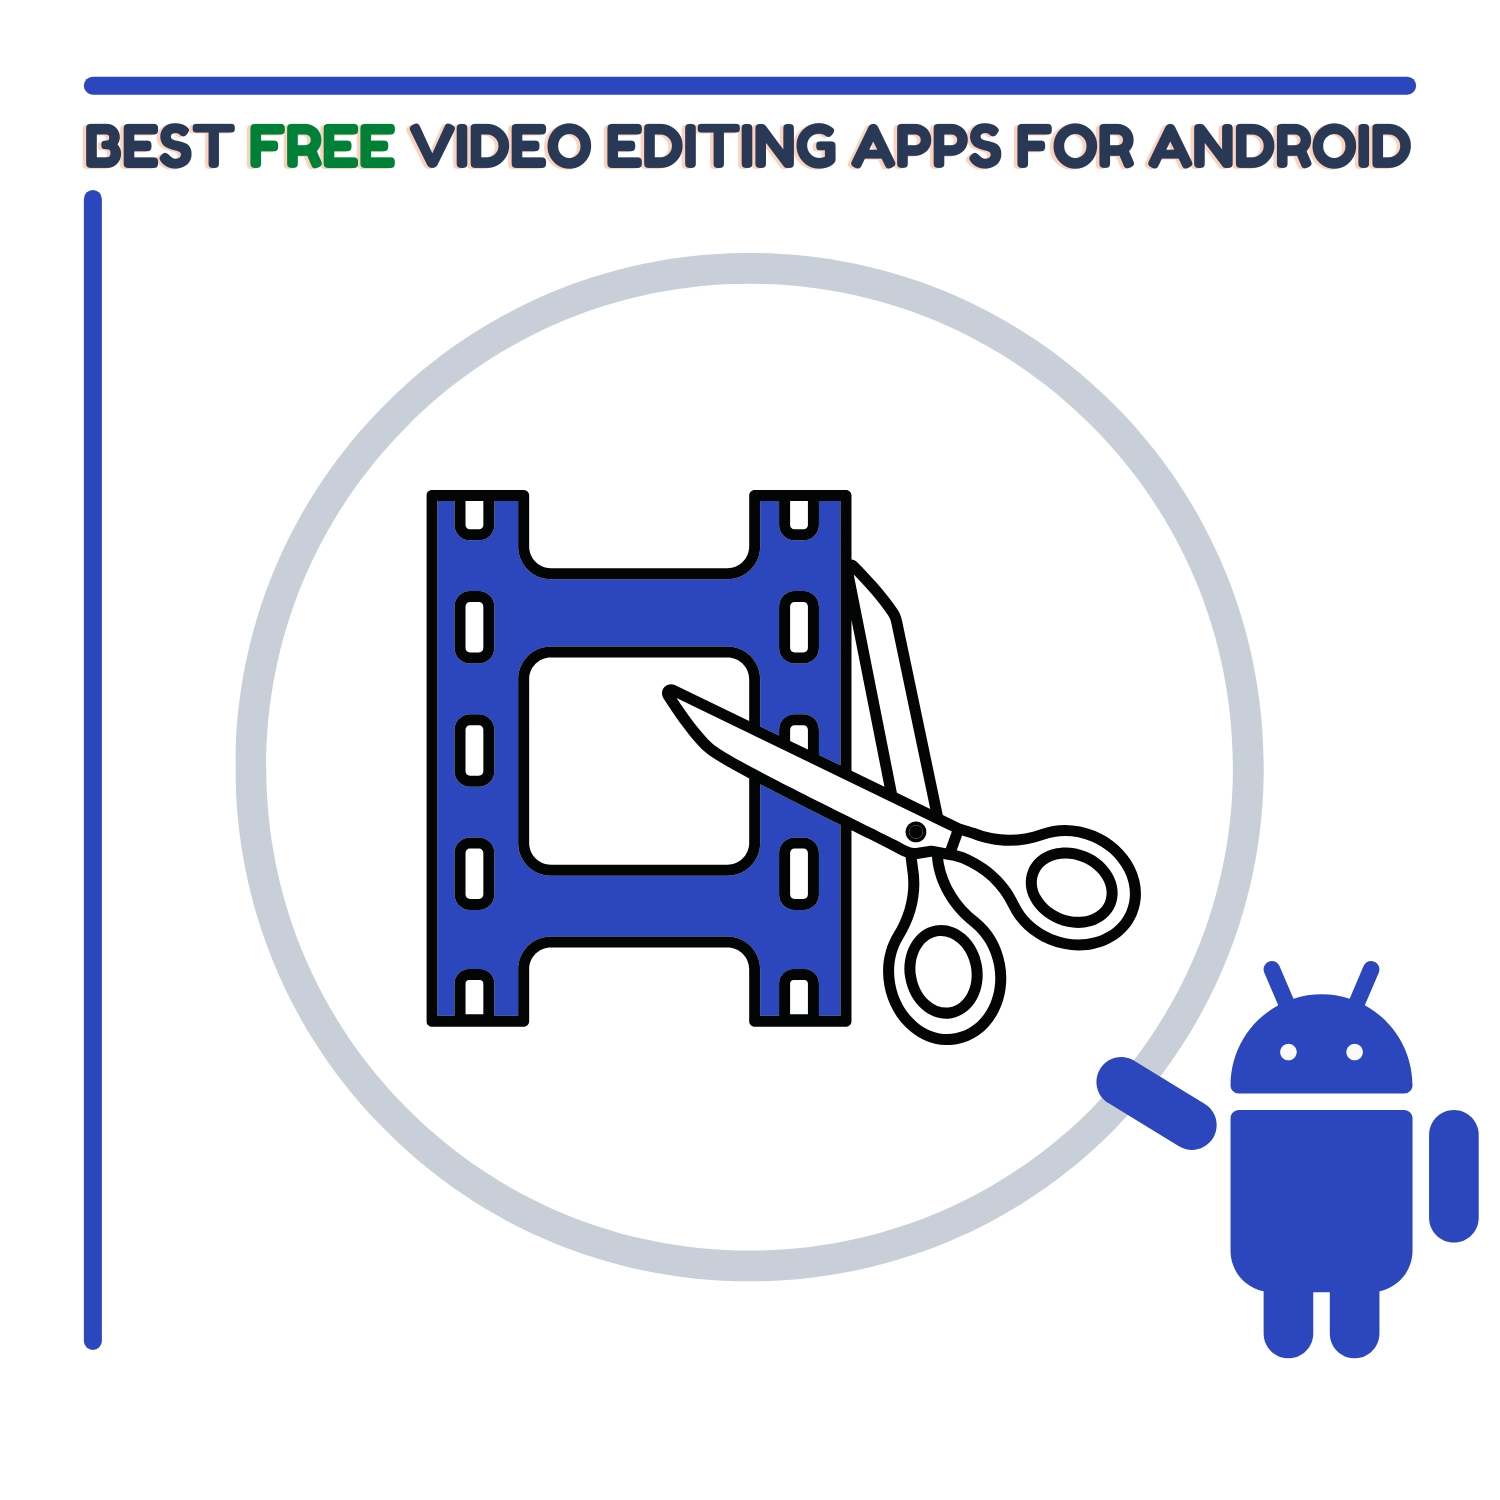 13 Best Video Editing Apps for Android